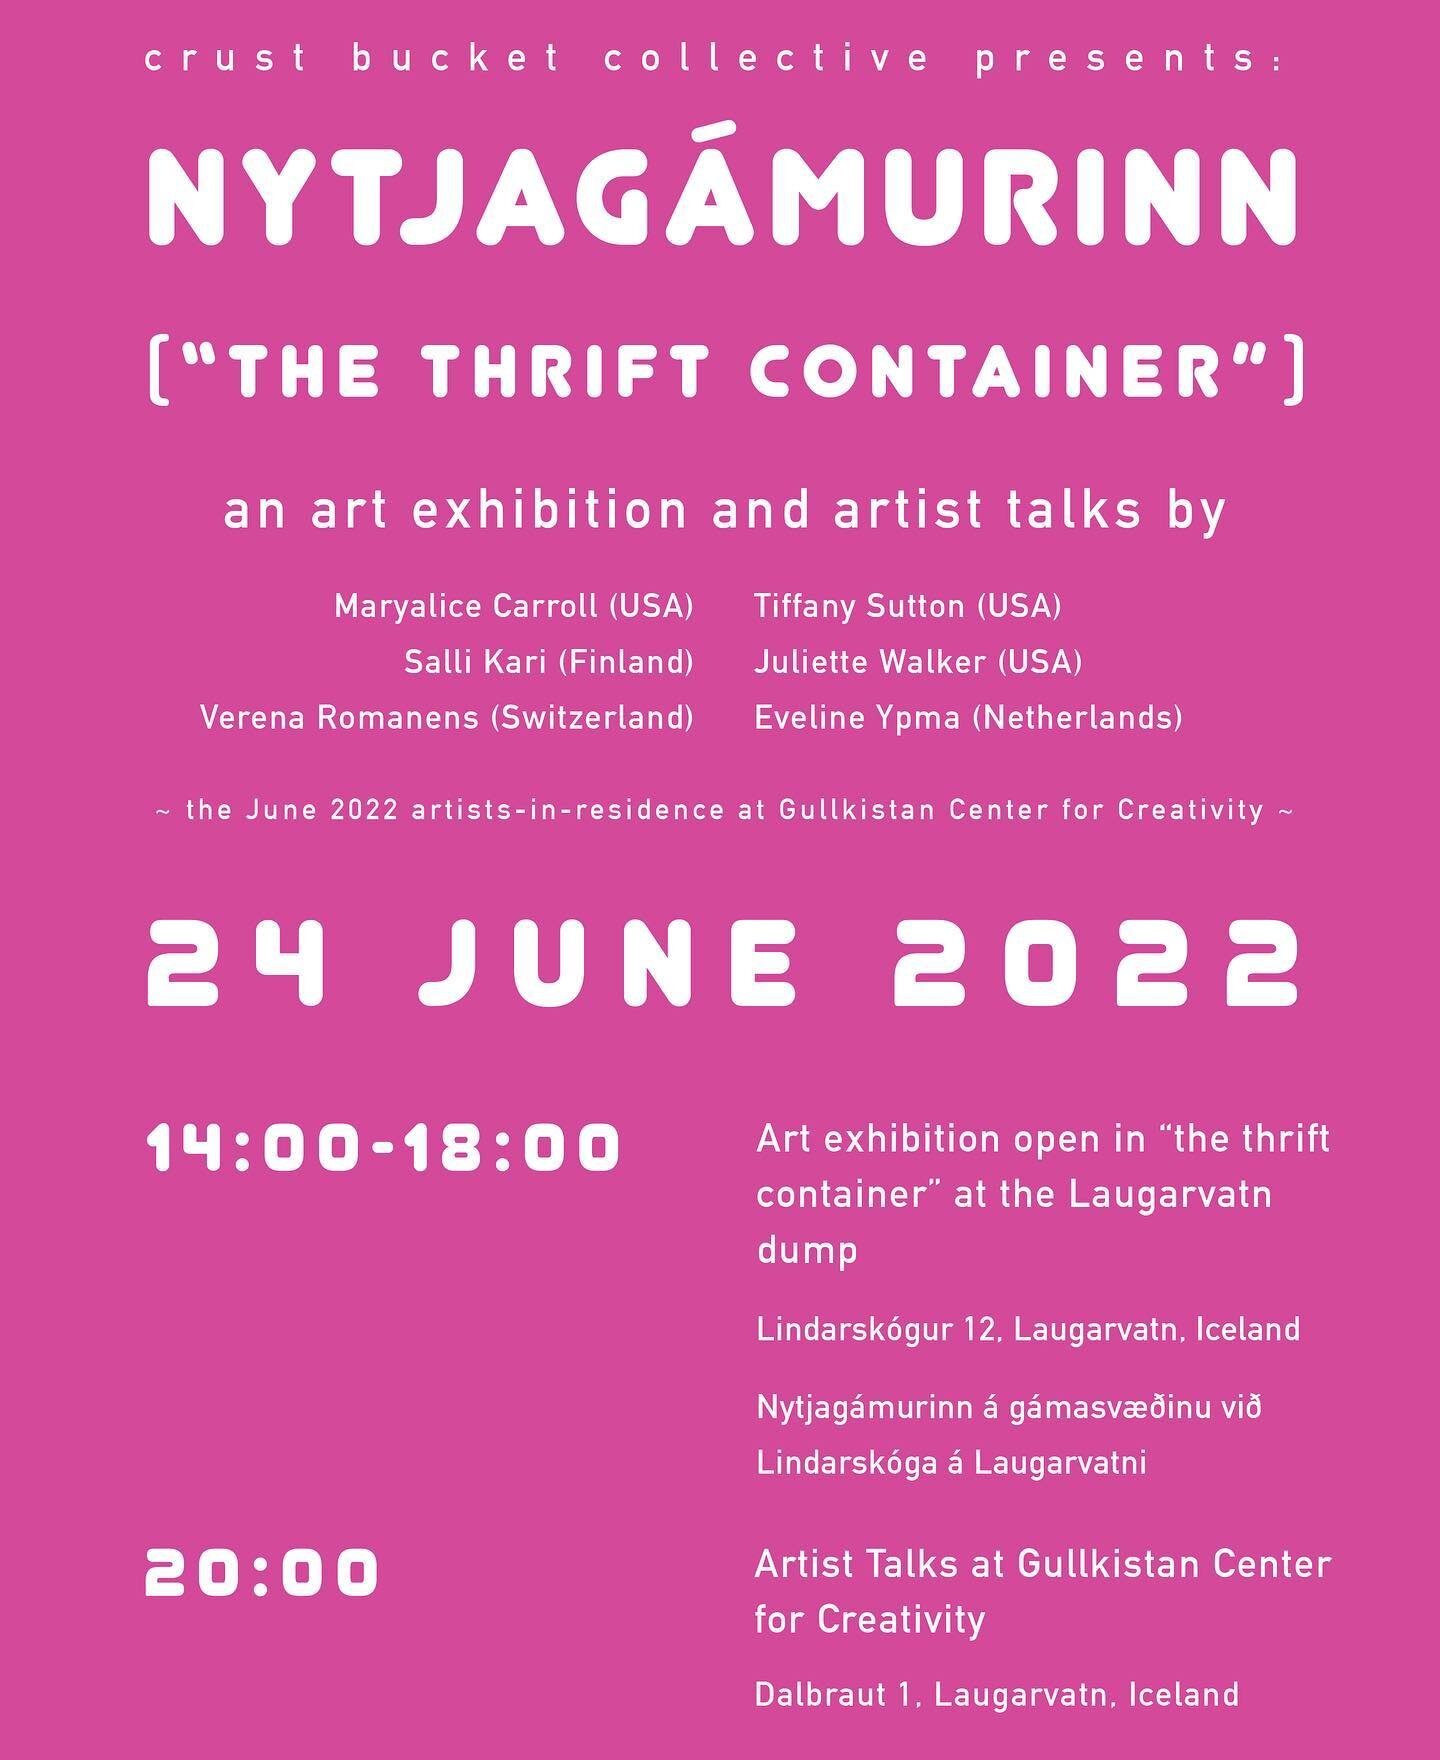 ✨TODAY ✨ in Laugarvatn, Iceland is a very special day! There will be an exhibition in a dumpster container (coordinated by the one and only @crustbucketcollective!) and artist talks in the evening at @gullkistan.is. All of us artists have been in res